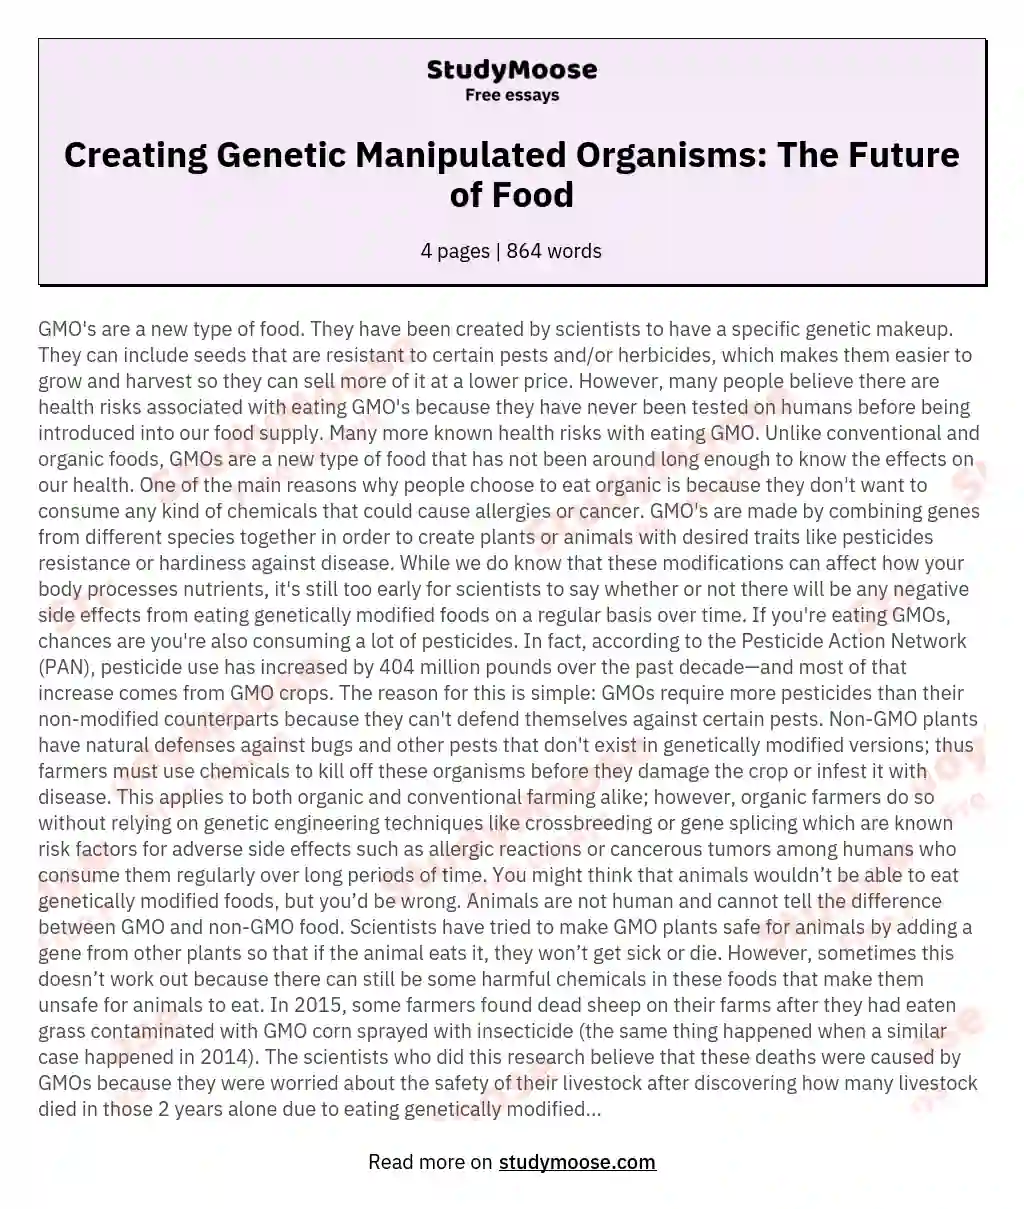 Creating Genetic Manipulated Organisms: The Future of Food essay